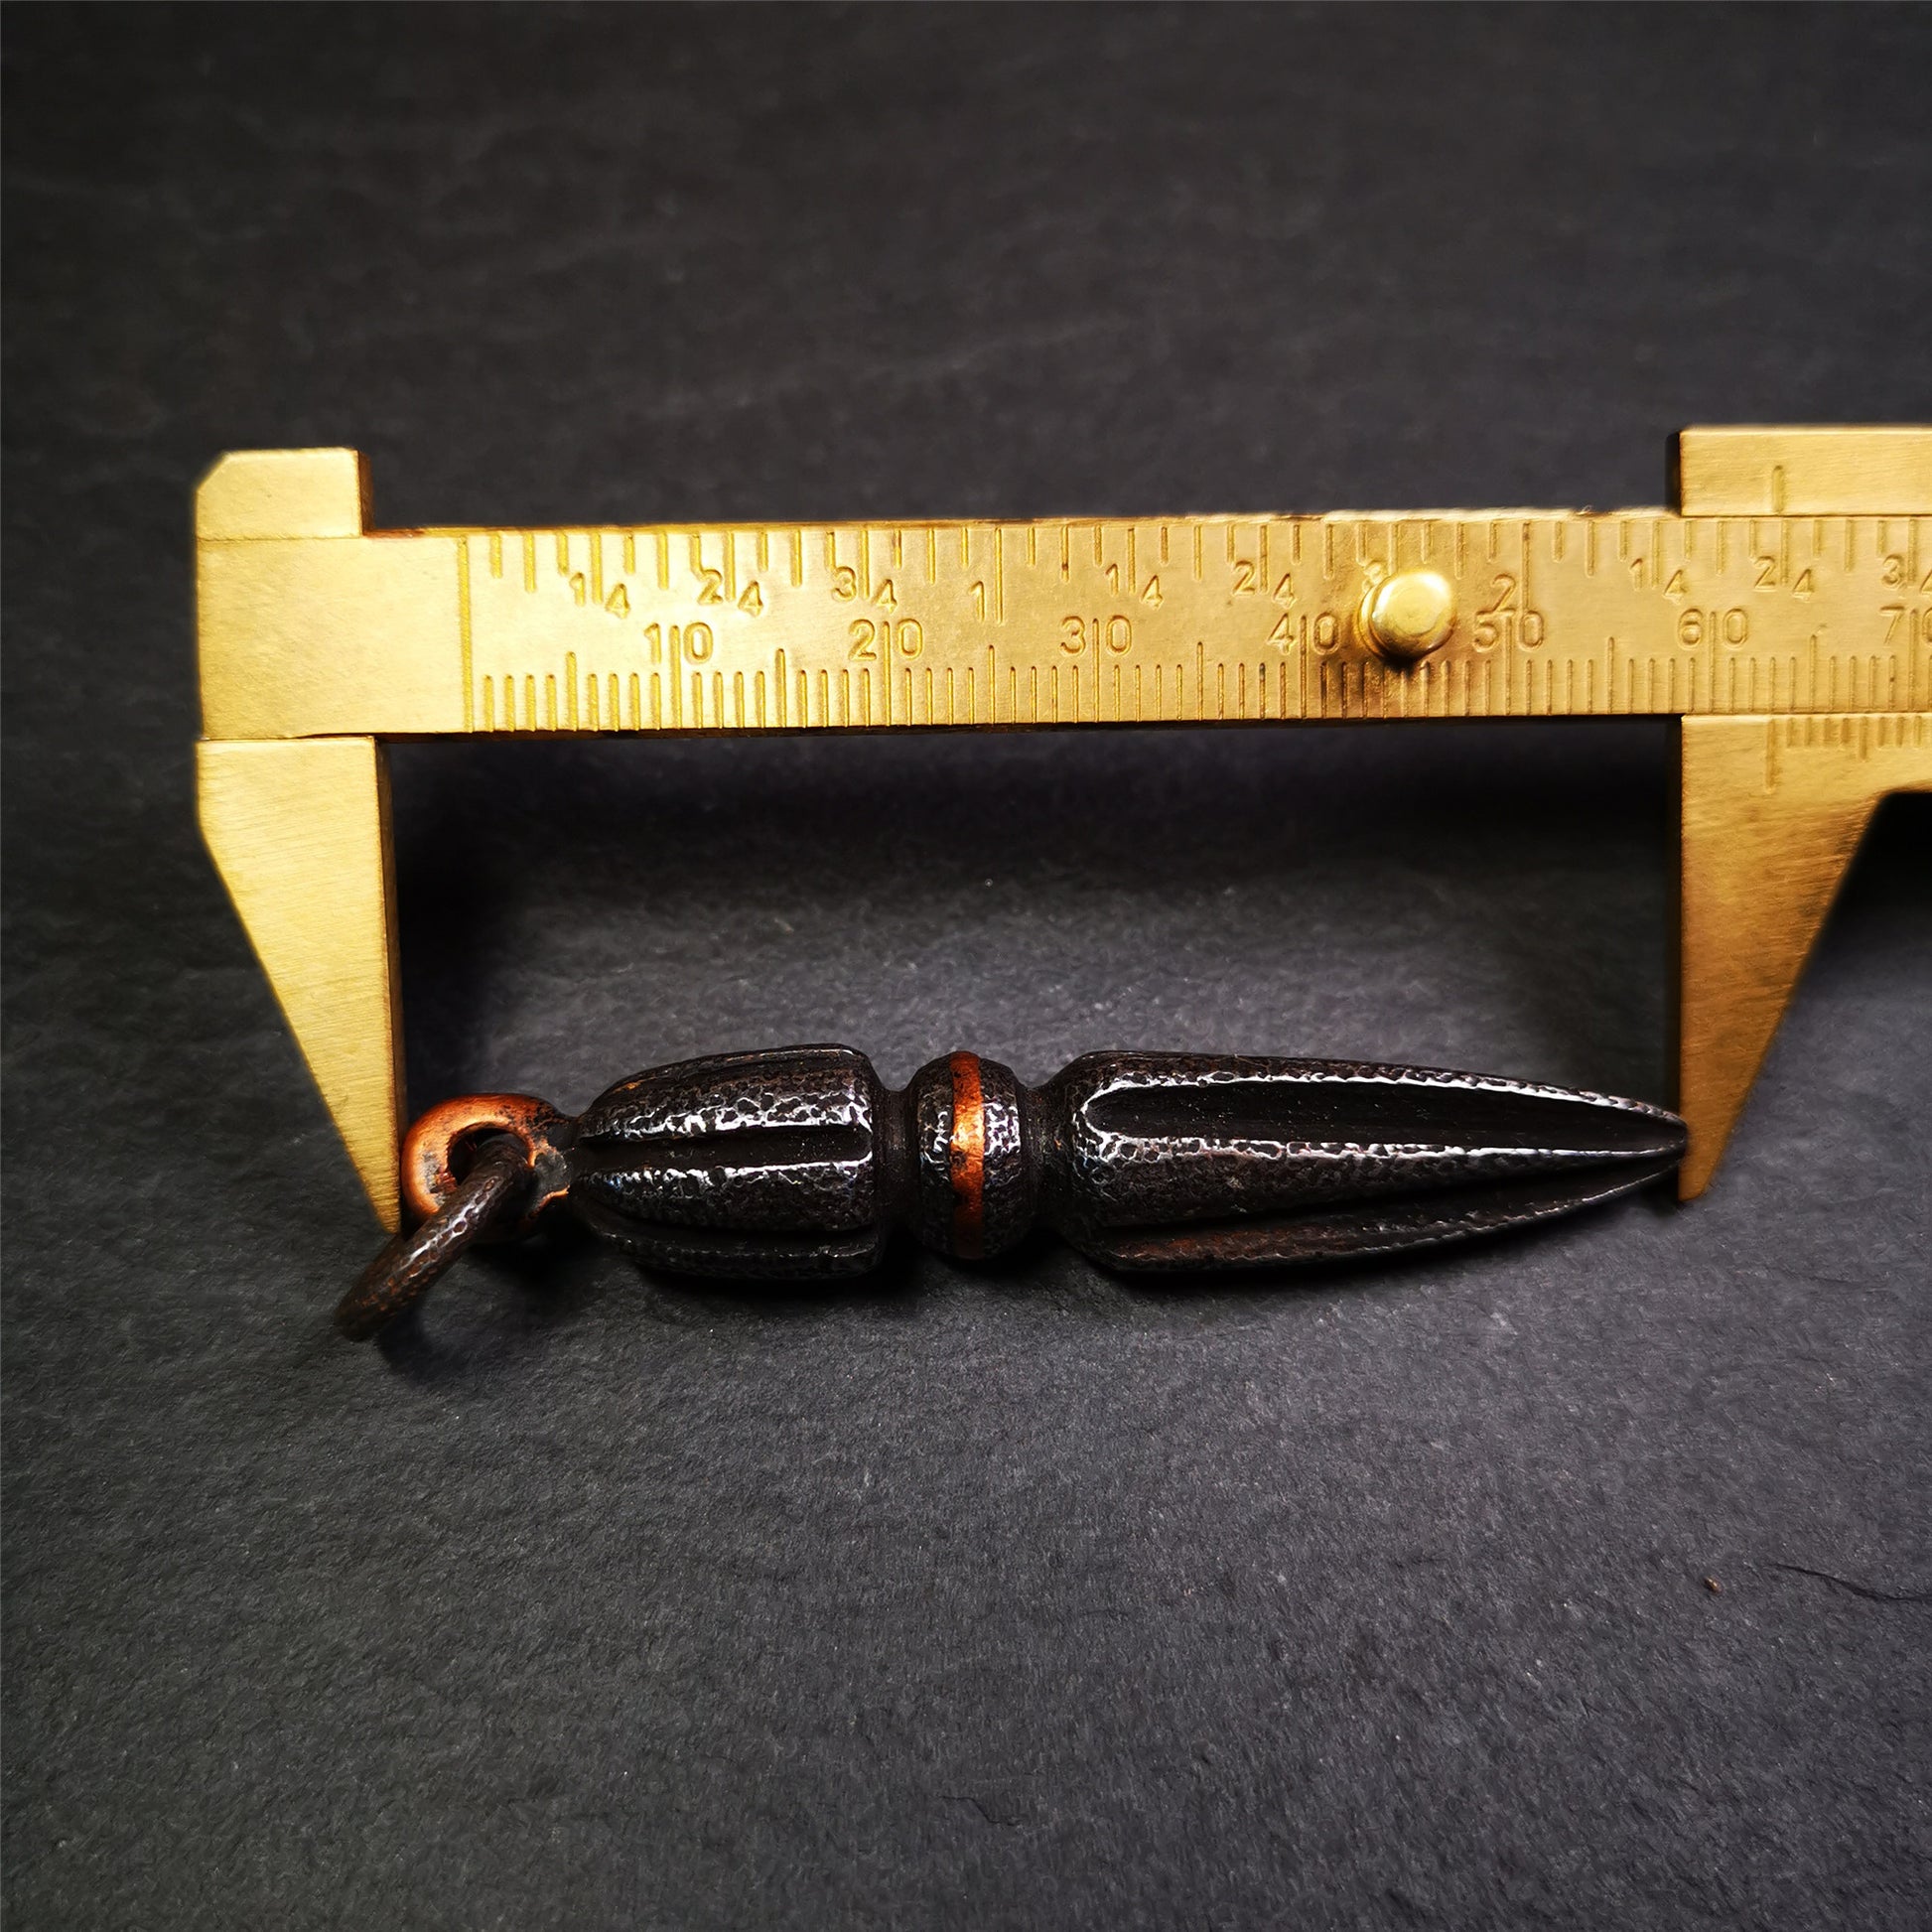 This handmade Dorje Phurba was crafted by Tibetan craftsmen from Hepo Town, Baiyu County, Tibet. The length is 2.5 inches,black color,the upper part is a vajra, and the lower part is a phurba. A copper wire is inlaid on the waist of the phurba.